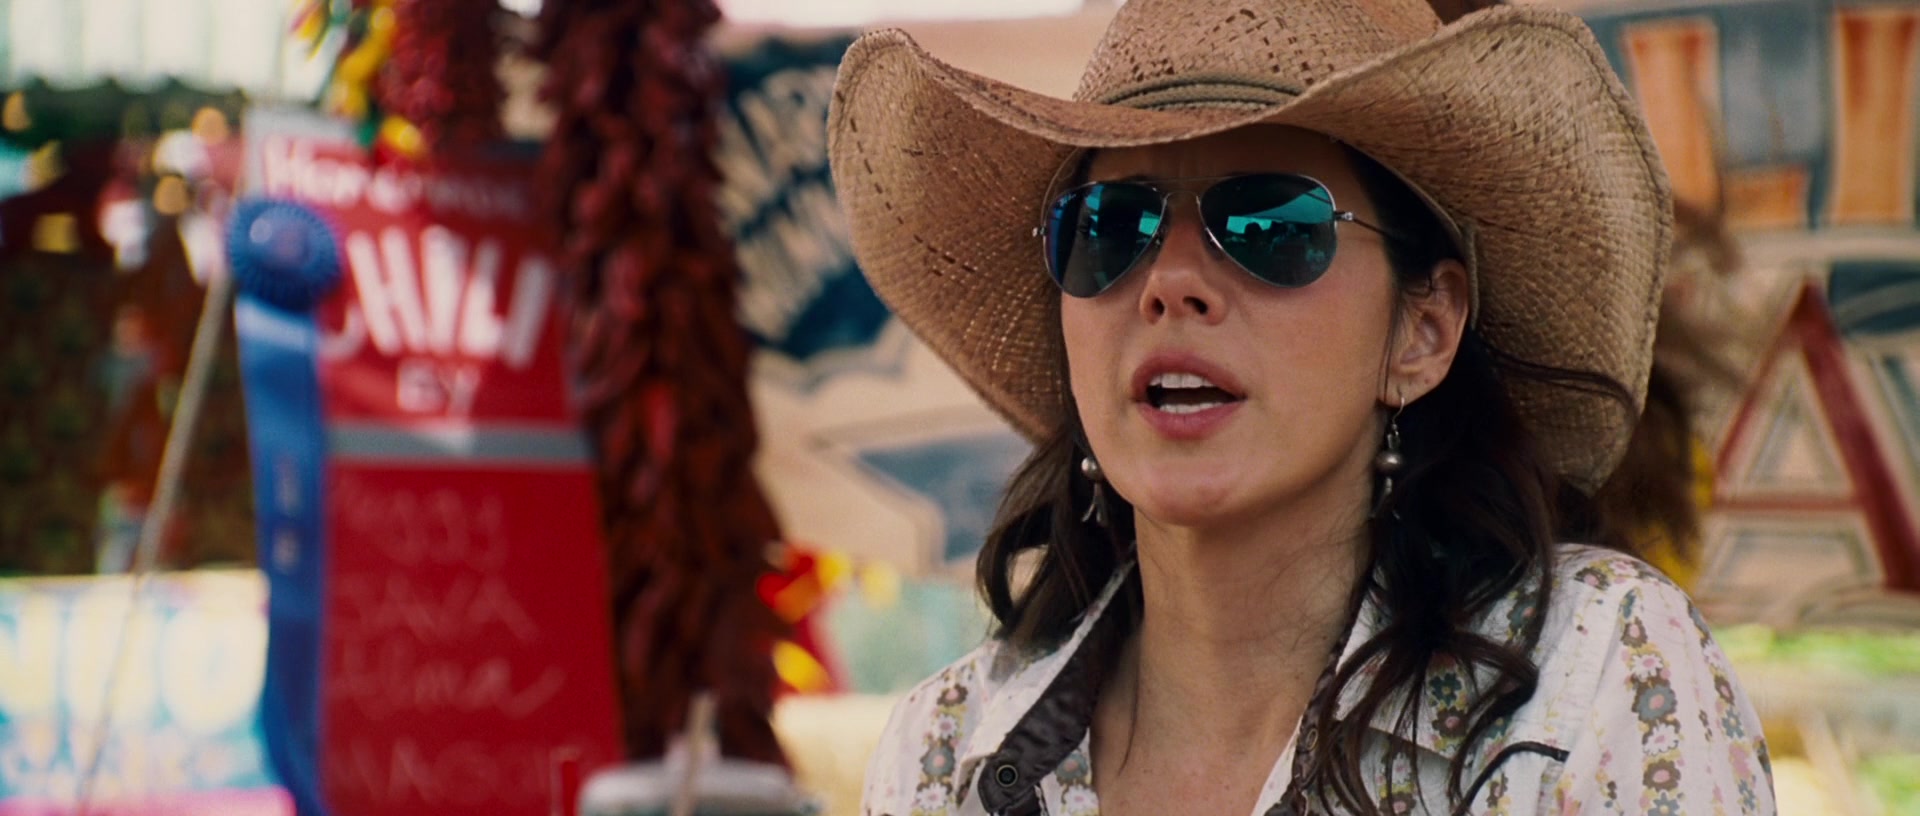 Ray-Ban Sunglasses of Marisa Tomei as Maggie in Wild Hogs (2007) .